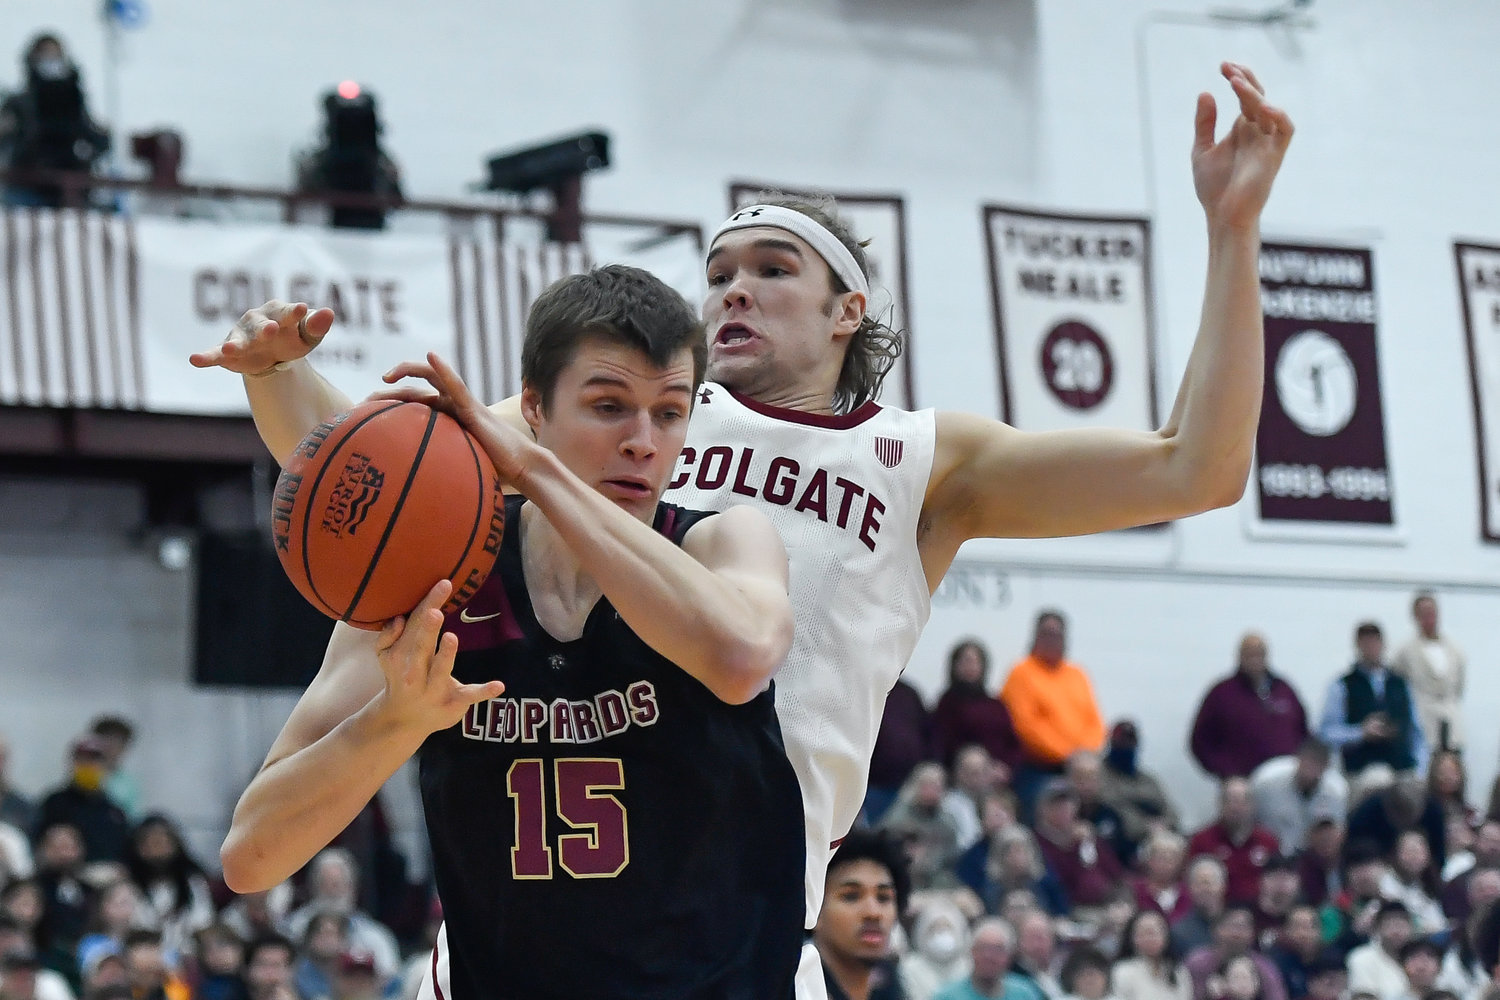 Lafayette center Justin Vander Baan, left, grabs a rebound in front of Colgate forward Keegan Records during the first half of the Patriot League Tournament championship on Wednesday night in Hamilton. Colgate won 79-61.